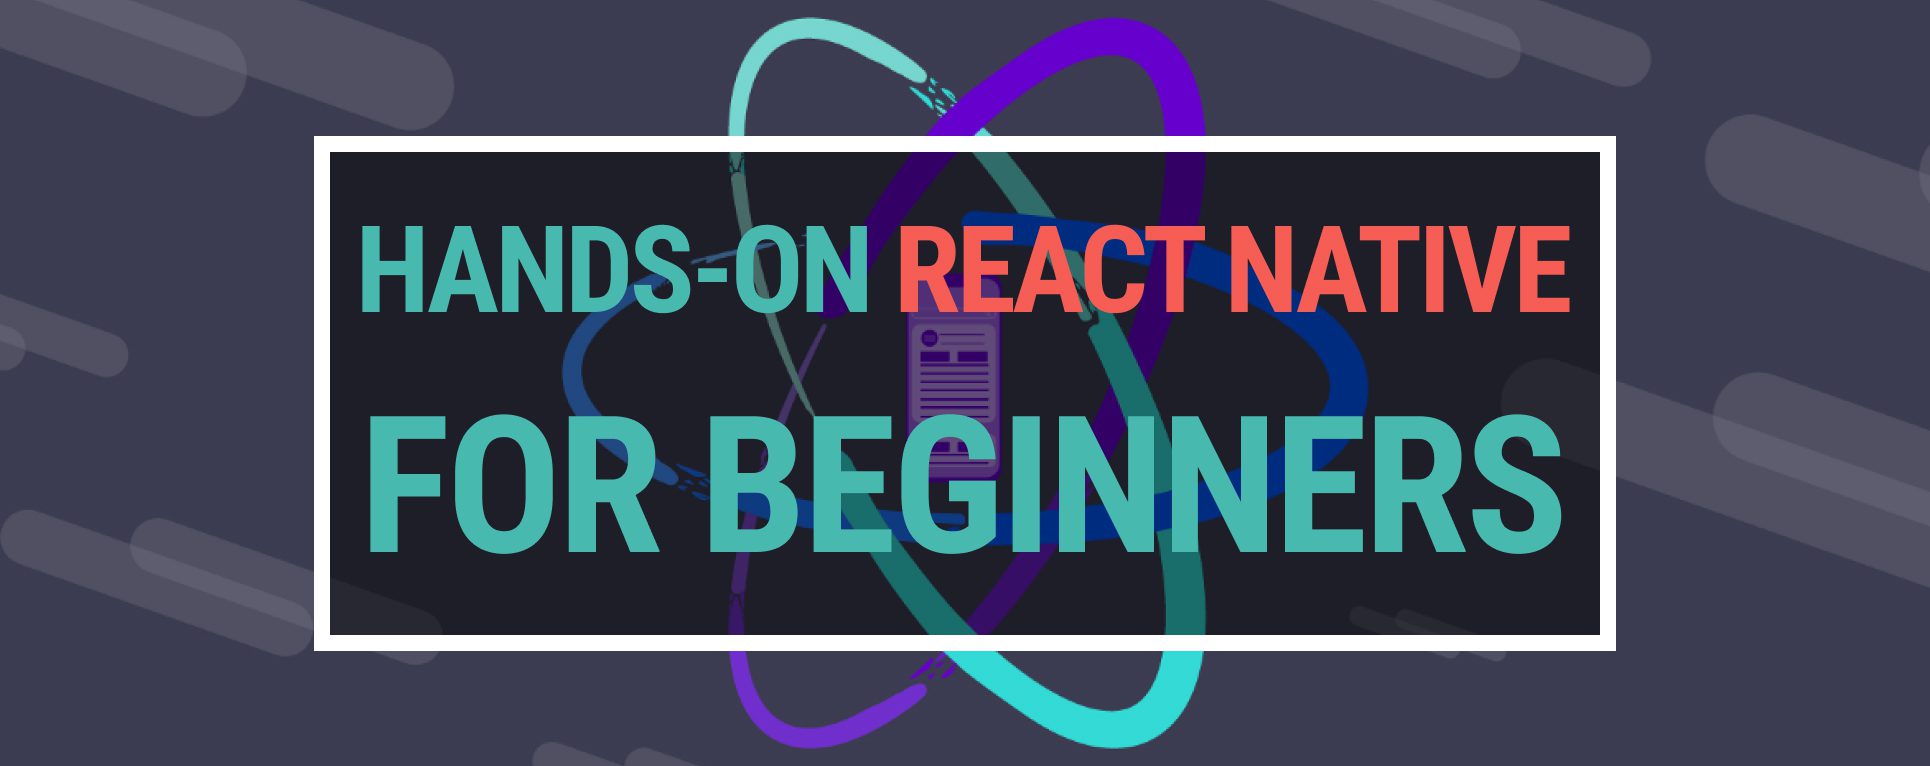 Hands-on React Native Tutorial for Beginners